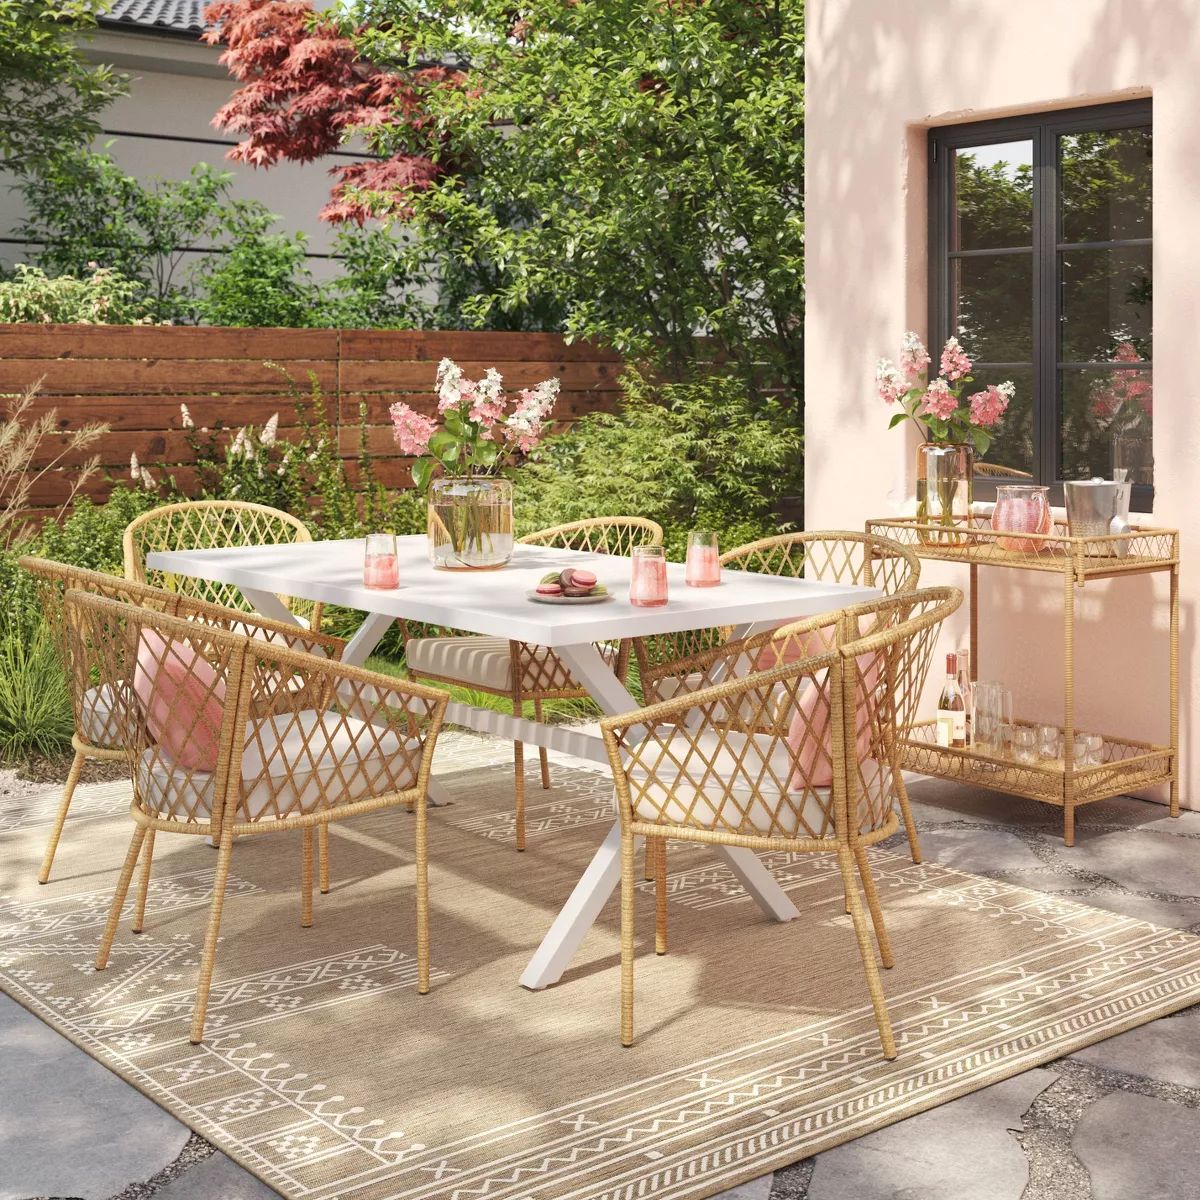 Seabury Steel 6 Person Rectangle Patio Dining Table, Outdoor Furniture - White - Threshold™ | Target